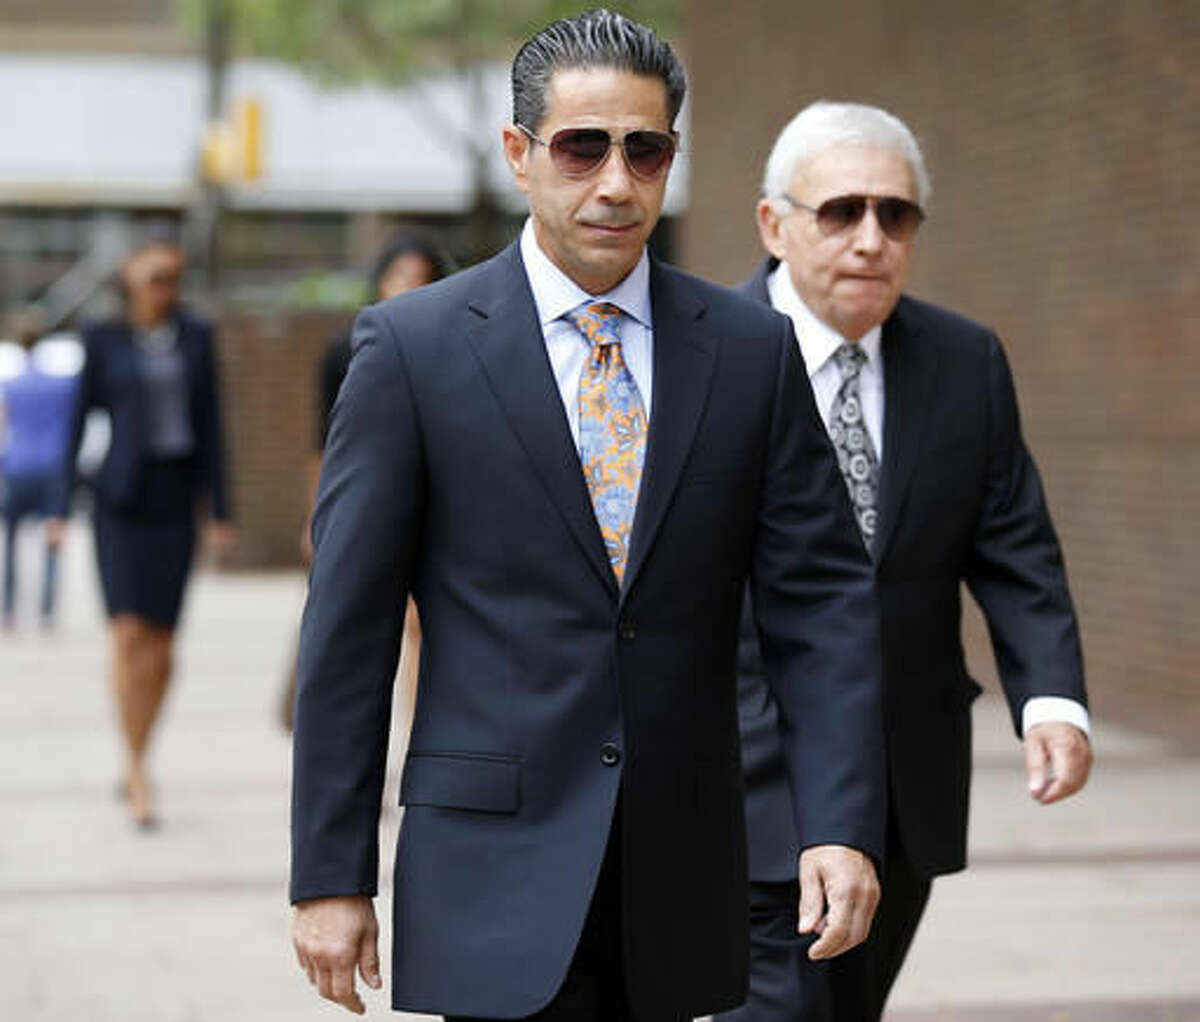 FILE - In this Oct. 10, 2014 file photo, Joey Merlino arrives at the federal court in Philadelphia. The flamboyant alleged head of the Philadelphia mob who has repeatedly beat murder charges in past cases is among nearly four dozen people Thursday, Aug. 4, 2016, with being part of an East Coast crime syndicate. (Yong Kim/Philadelphia Daily News via AP, File)